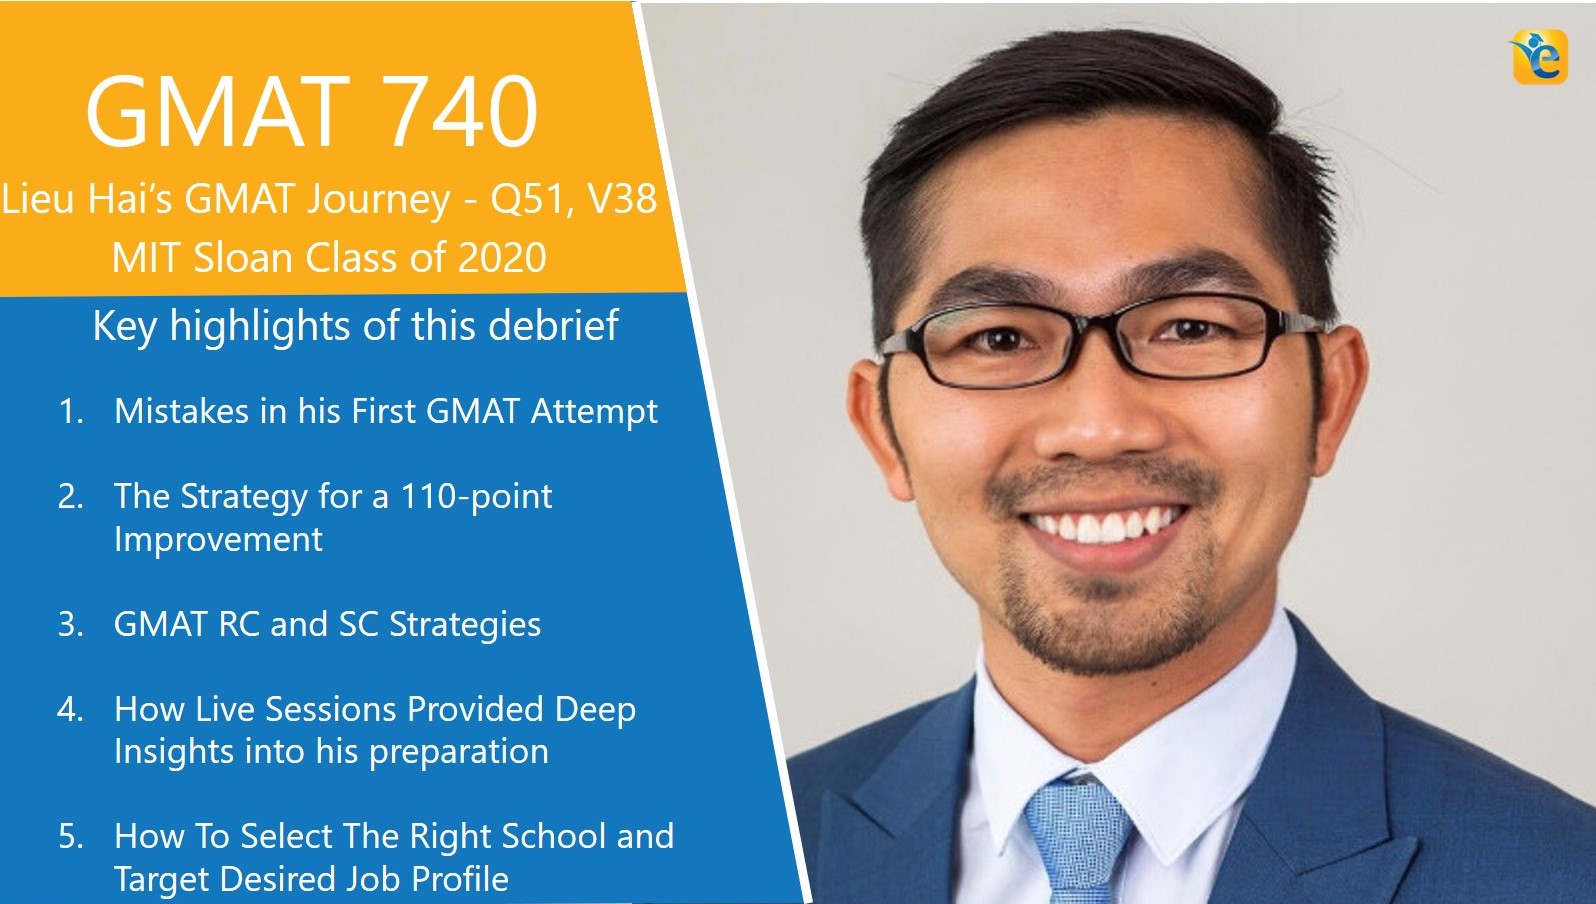 V25 to V38 Improvement in GMAT Verbal with a GMAT 740 – Lieu Hai’s Journey to MIT Sloan